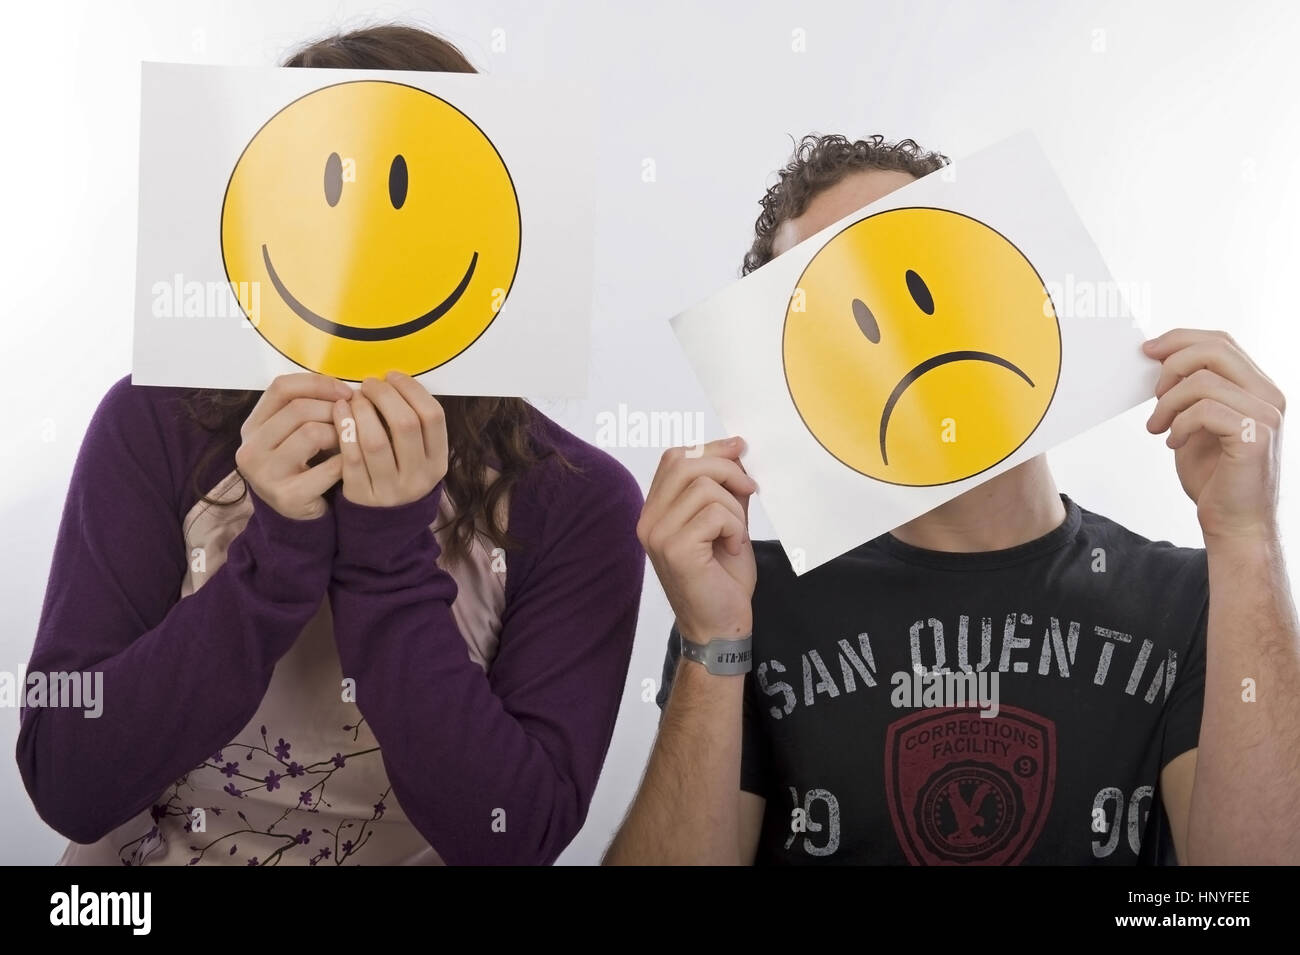 Model release , Frau und Mann mit lachendem und traurigem Smiley - man and woman with laughing an sadly smiley Stock Photo